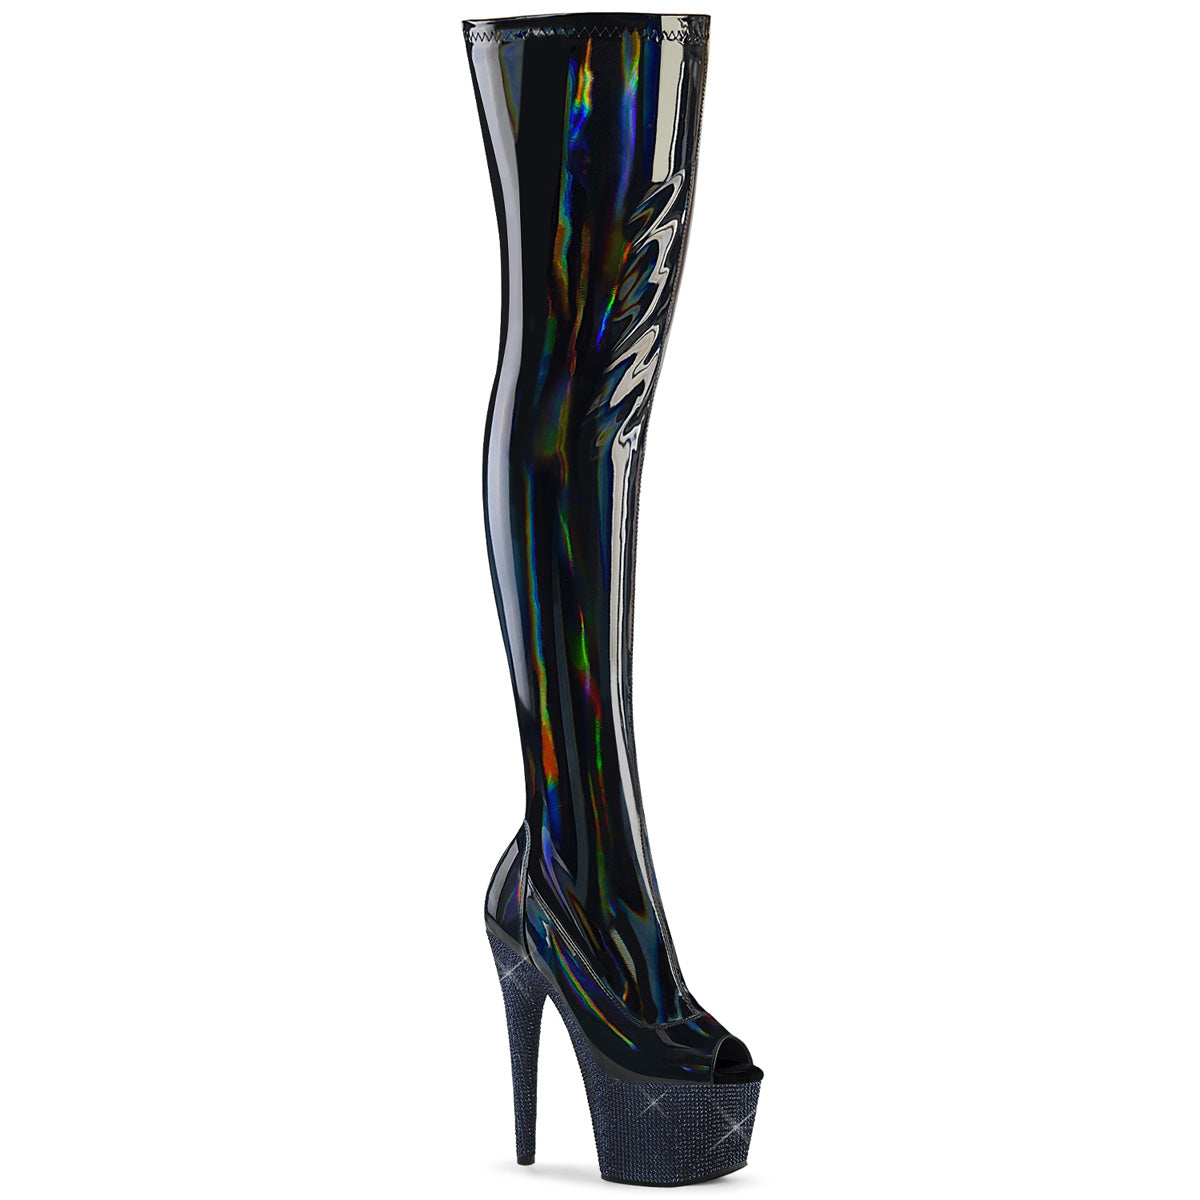 BEJEWELED-3011-7 Thigh High Boots